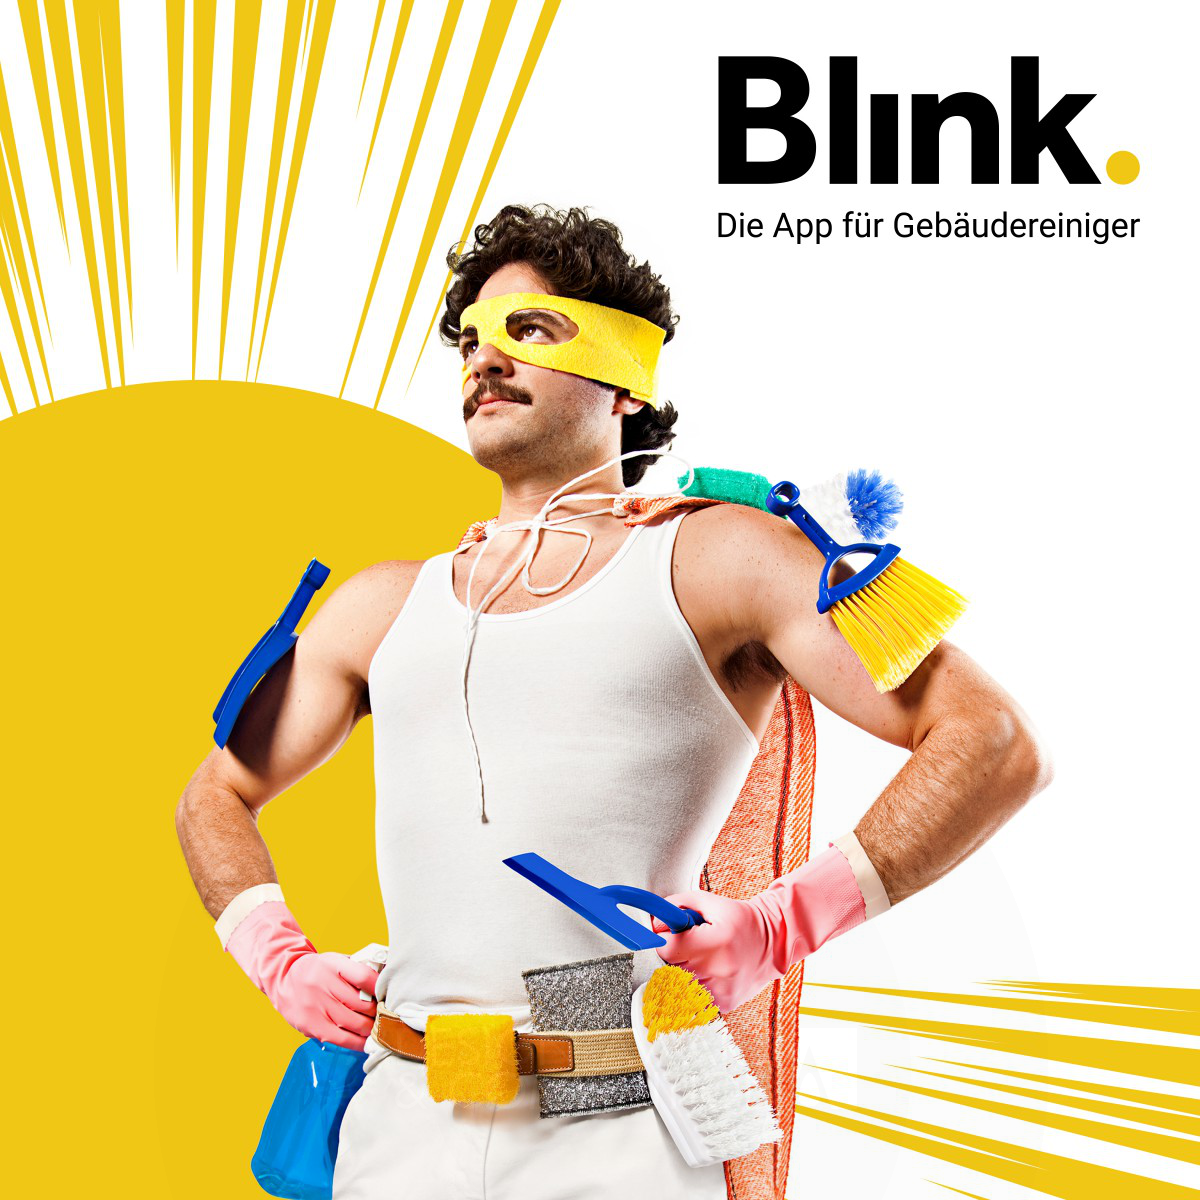 Blink App Image Campaign  by Bloom advertising agency